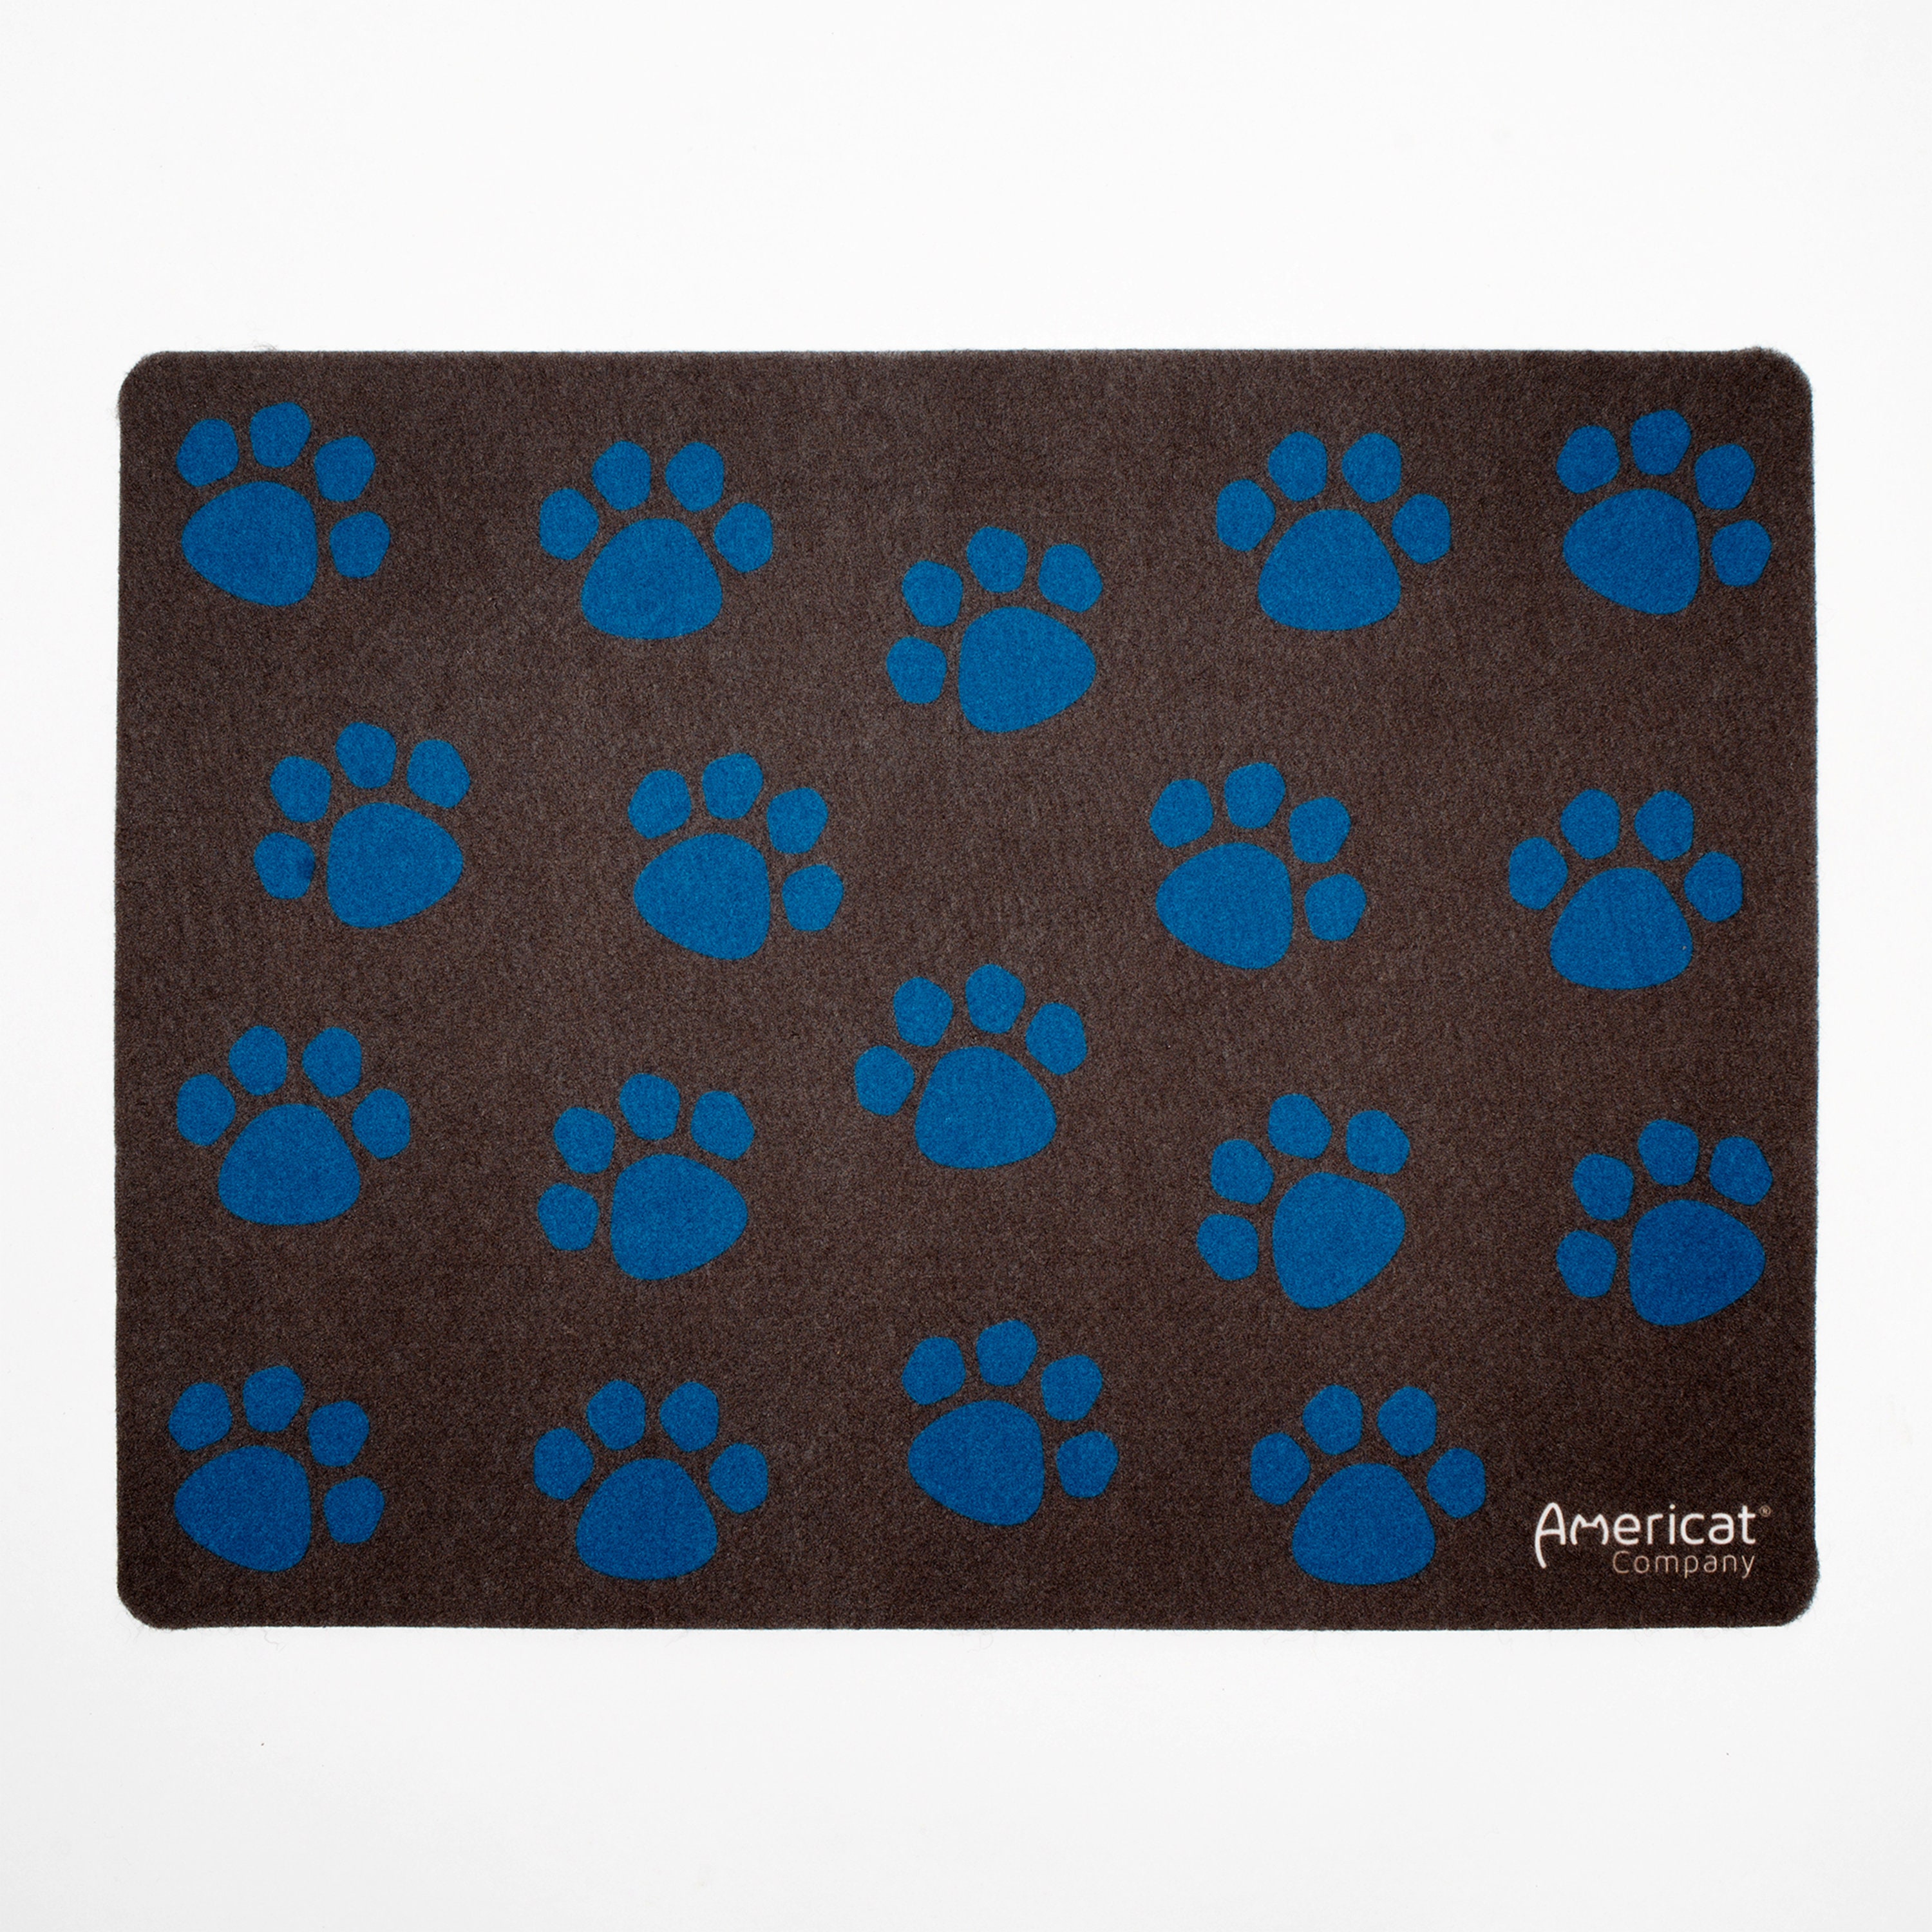 Americat Company Cat Feeding Mat for Food and Water Bowls - Machine Washable, Waterproof, Eco-Friendly, No-Slip, Made in USA Cat Placemat (cats)